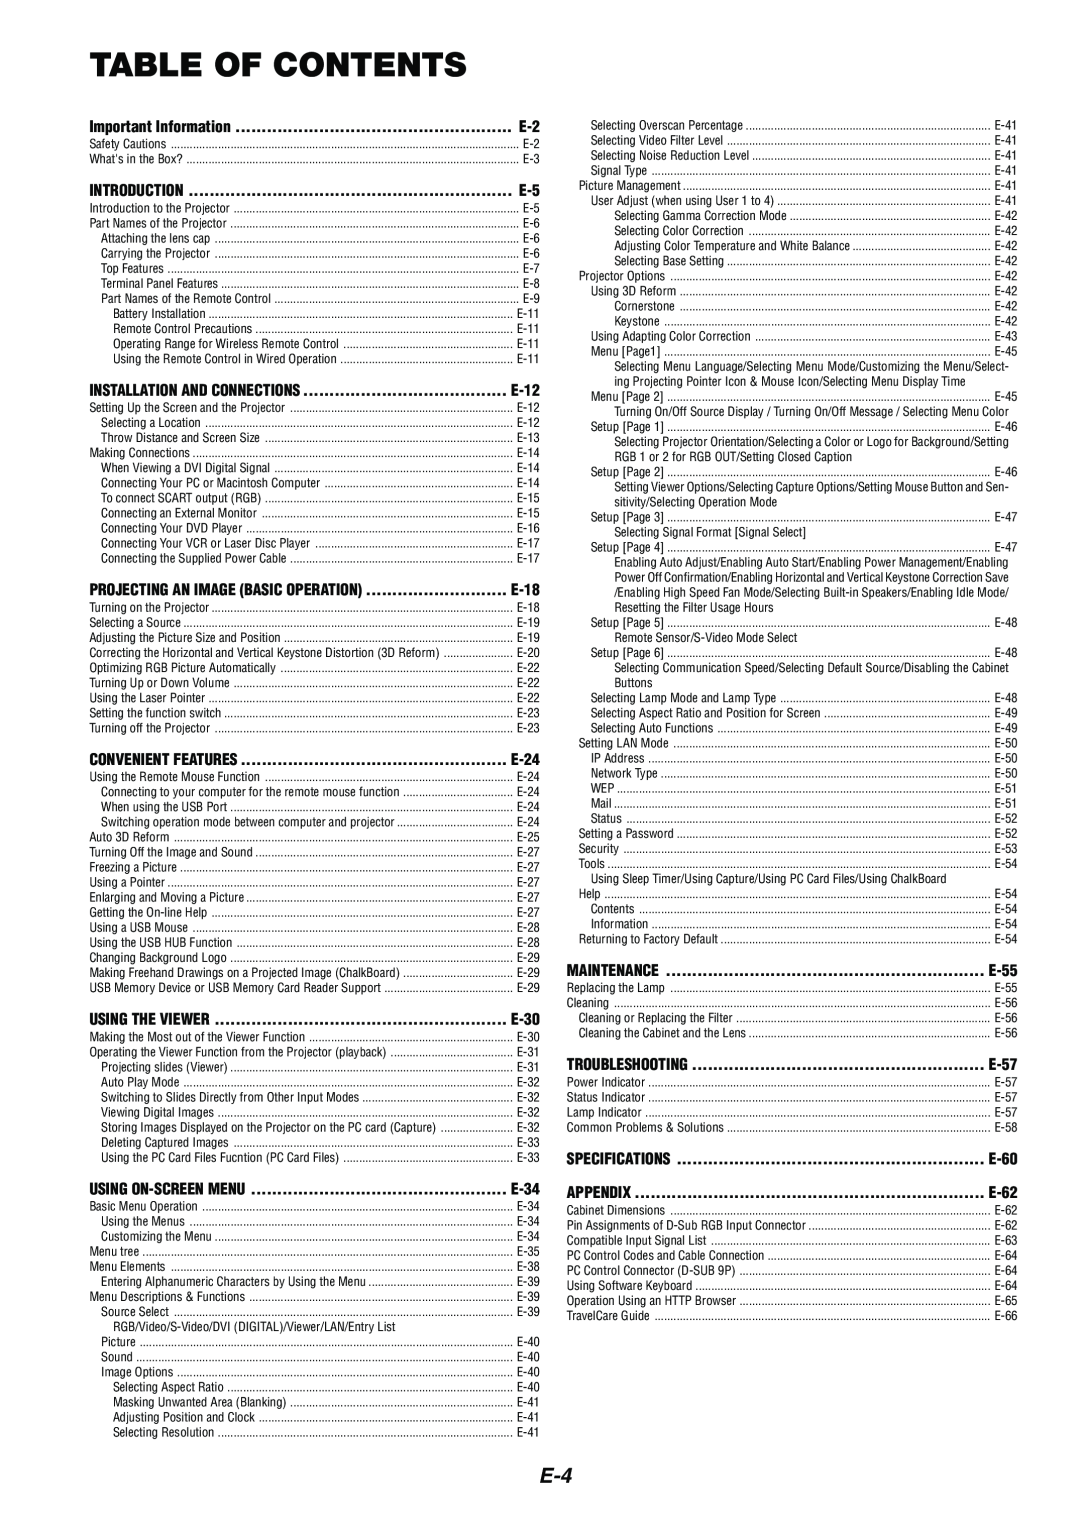 Kensington MT1075 Table Of Contents, Important Information, Introduction, Using The Viewer, Maintenance, Specifications 